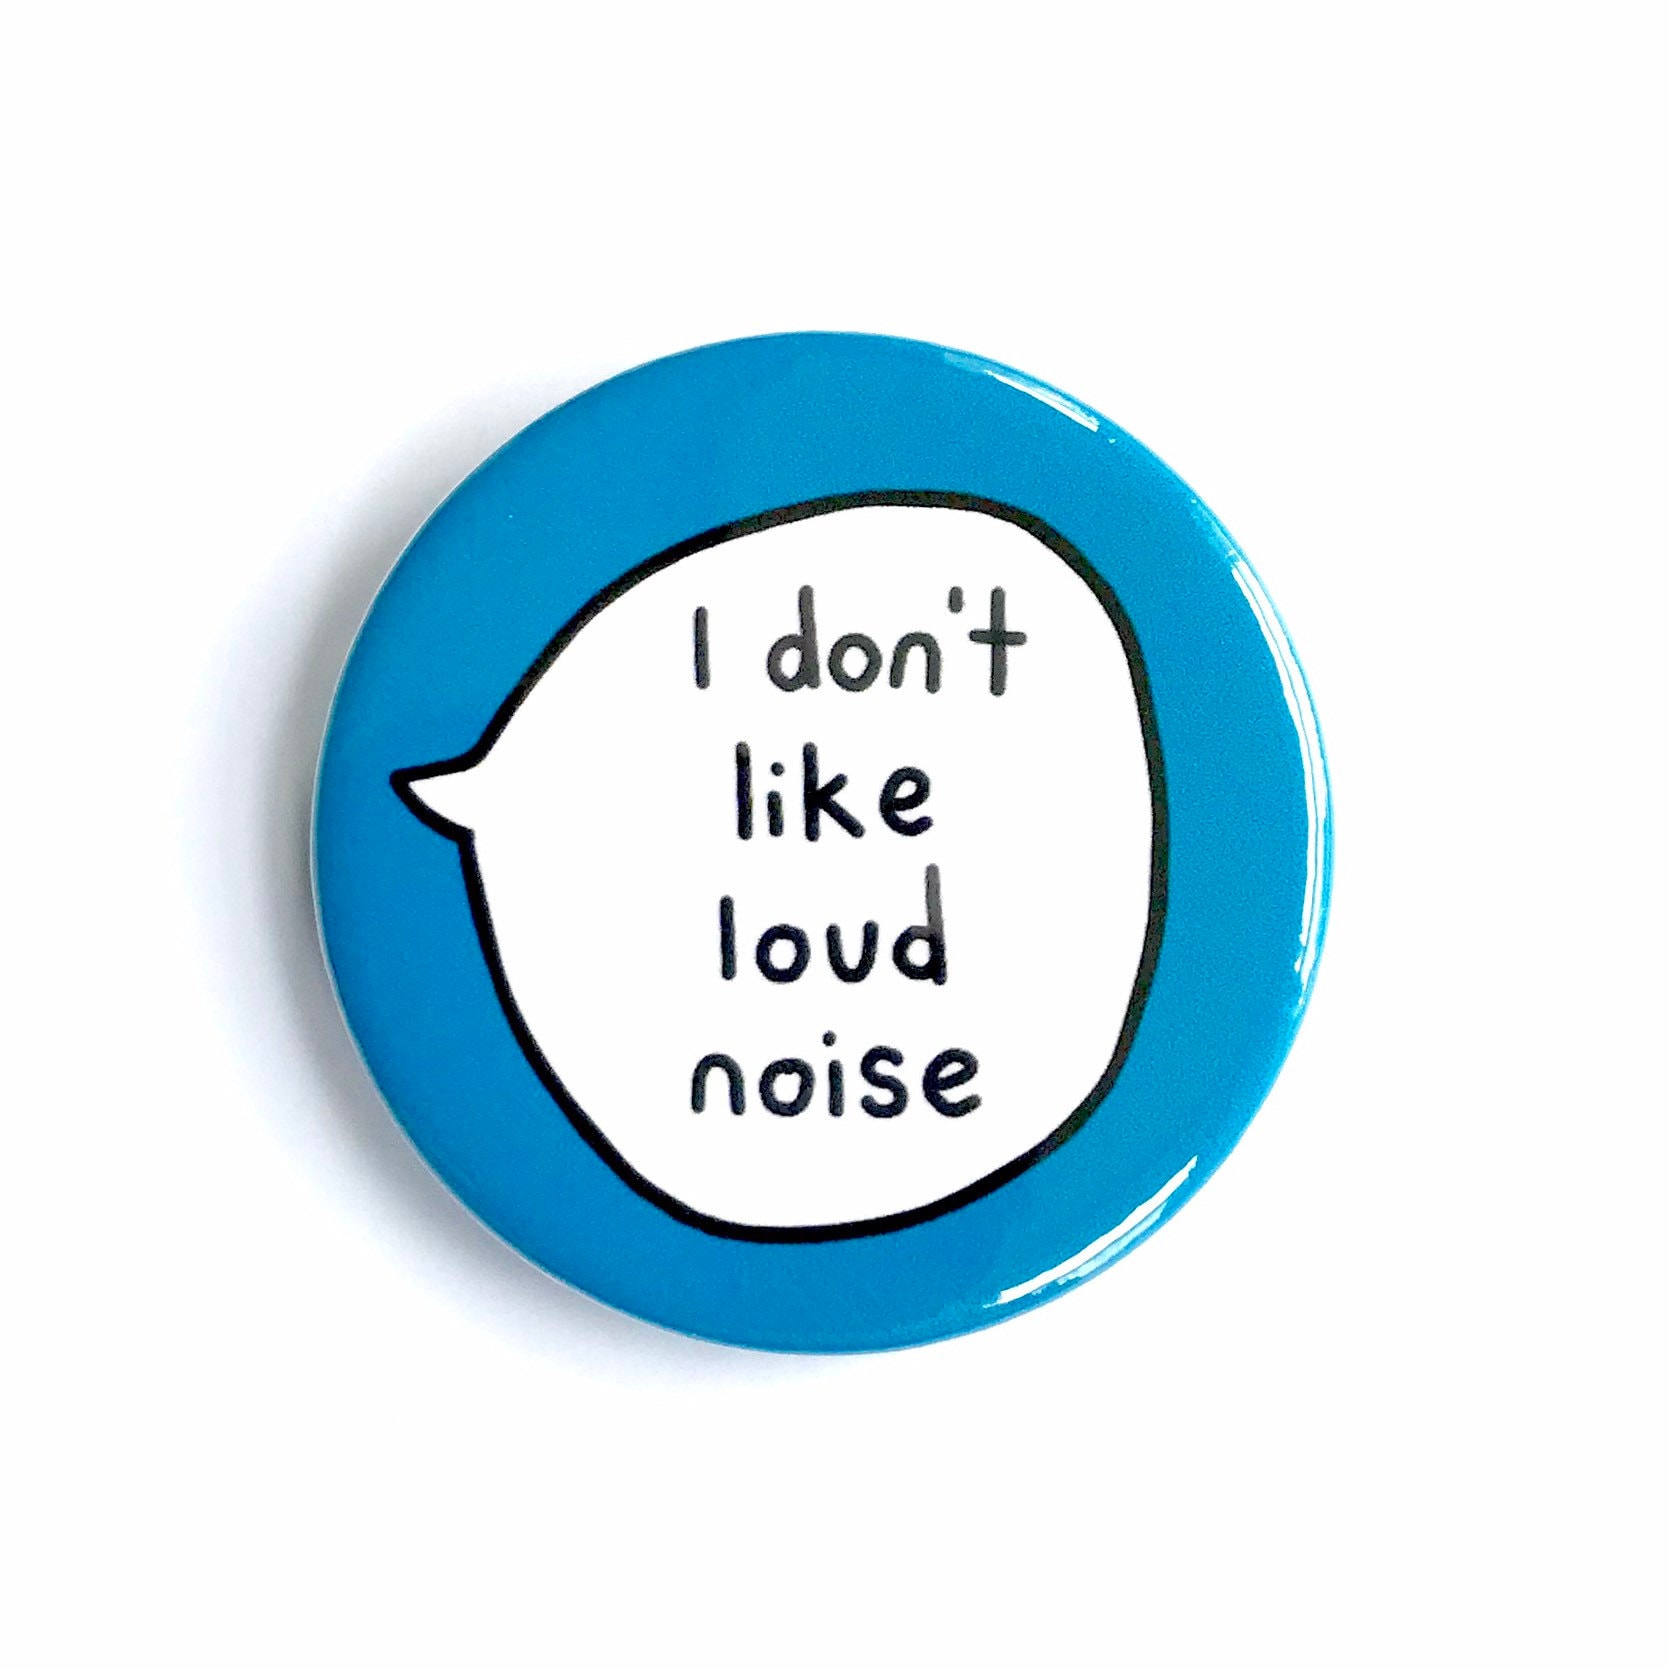 I Dont Like Loud Noise Pin Badge Button